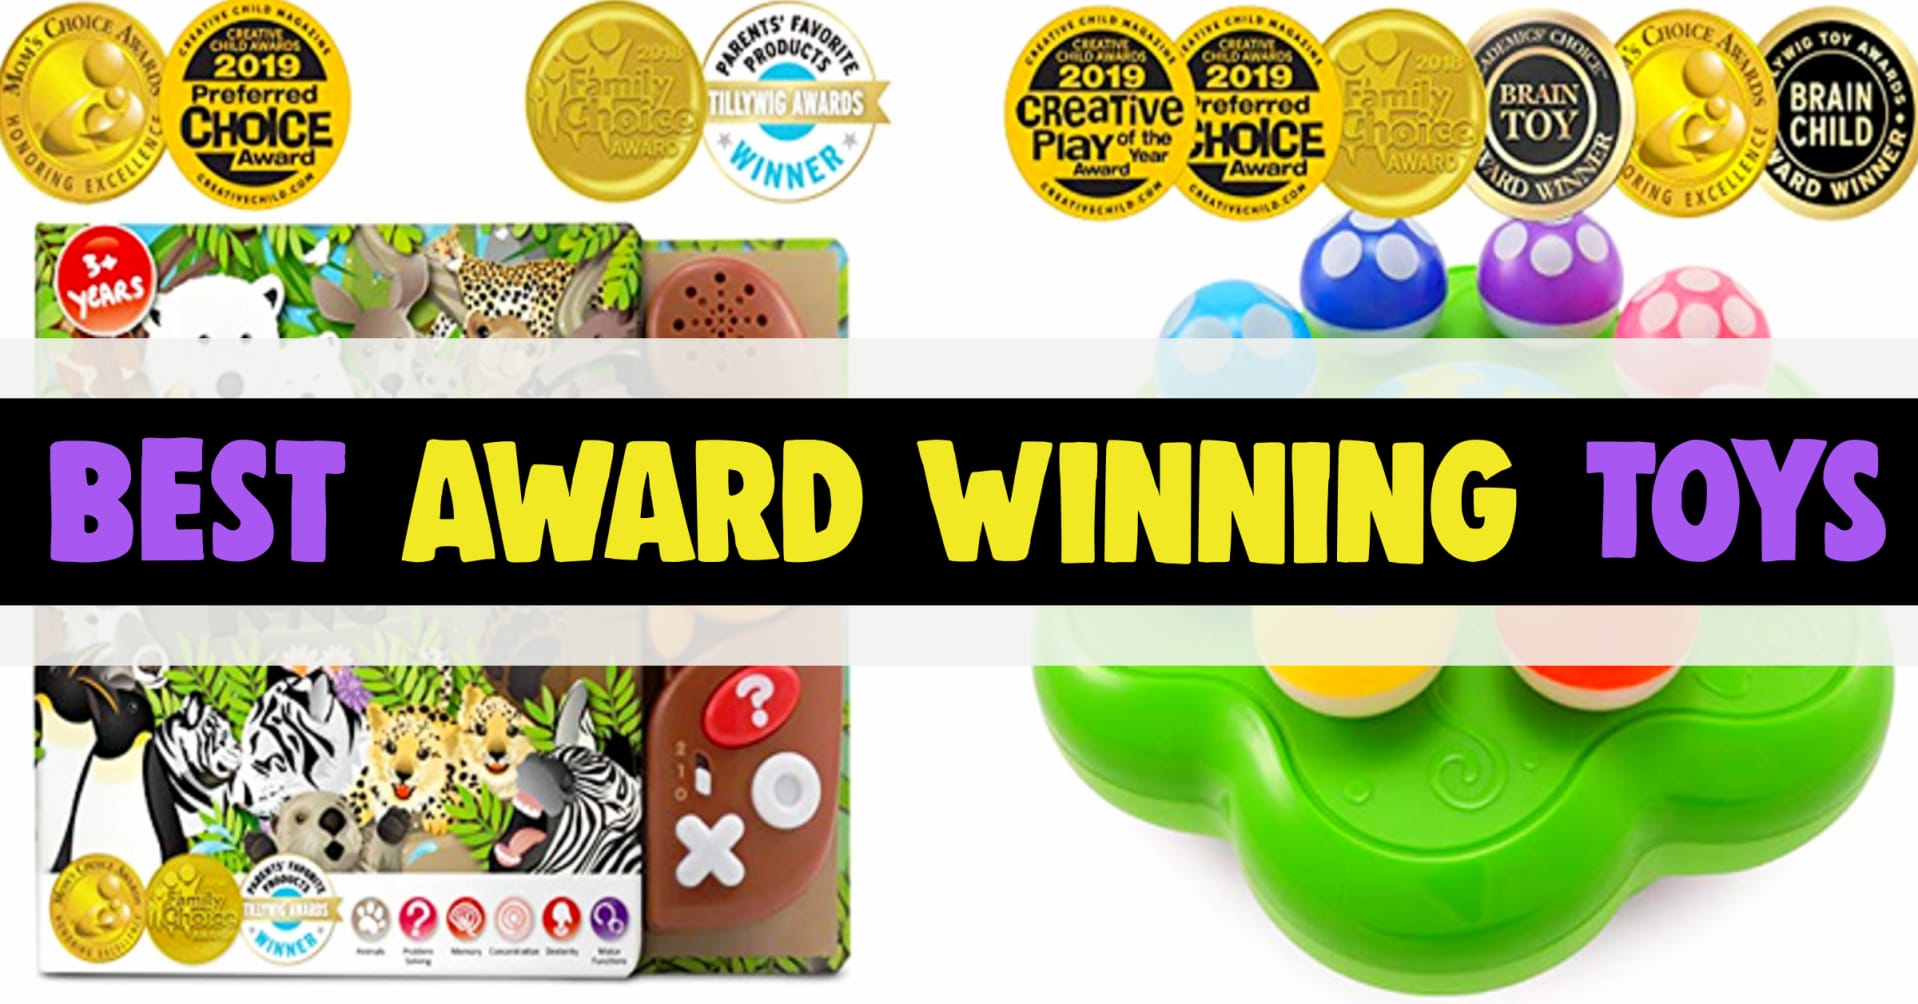 Award Winning Toys! Best award winning toys and toy awards 2019 for 1 years olds, 2 years olds, 3 year olds and all toddler boys and girls. Toy of the Year awards!